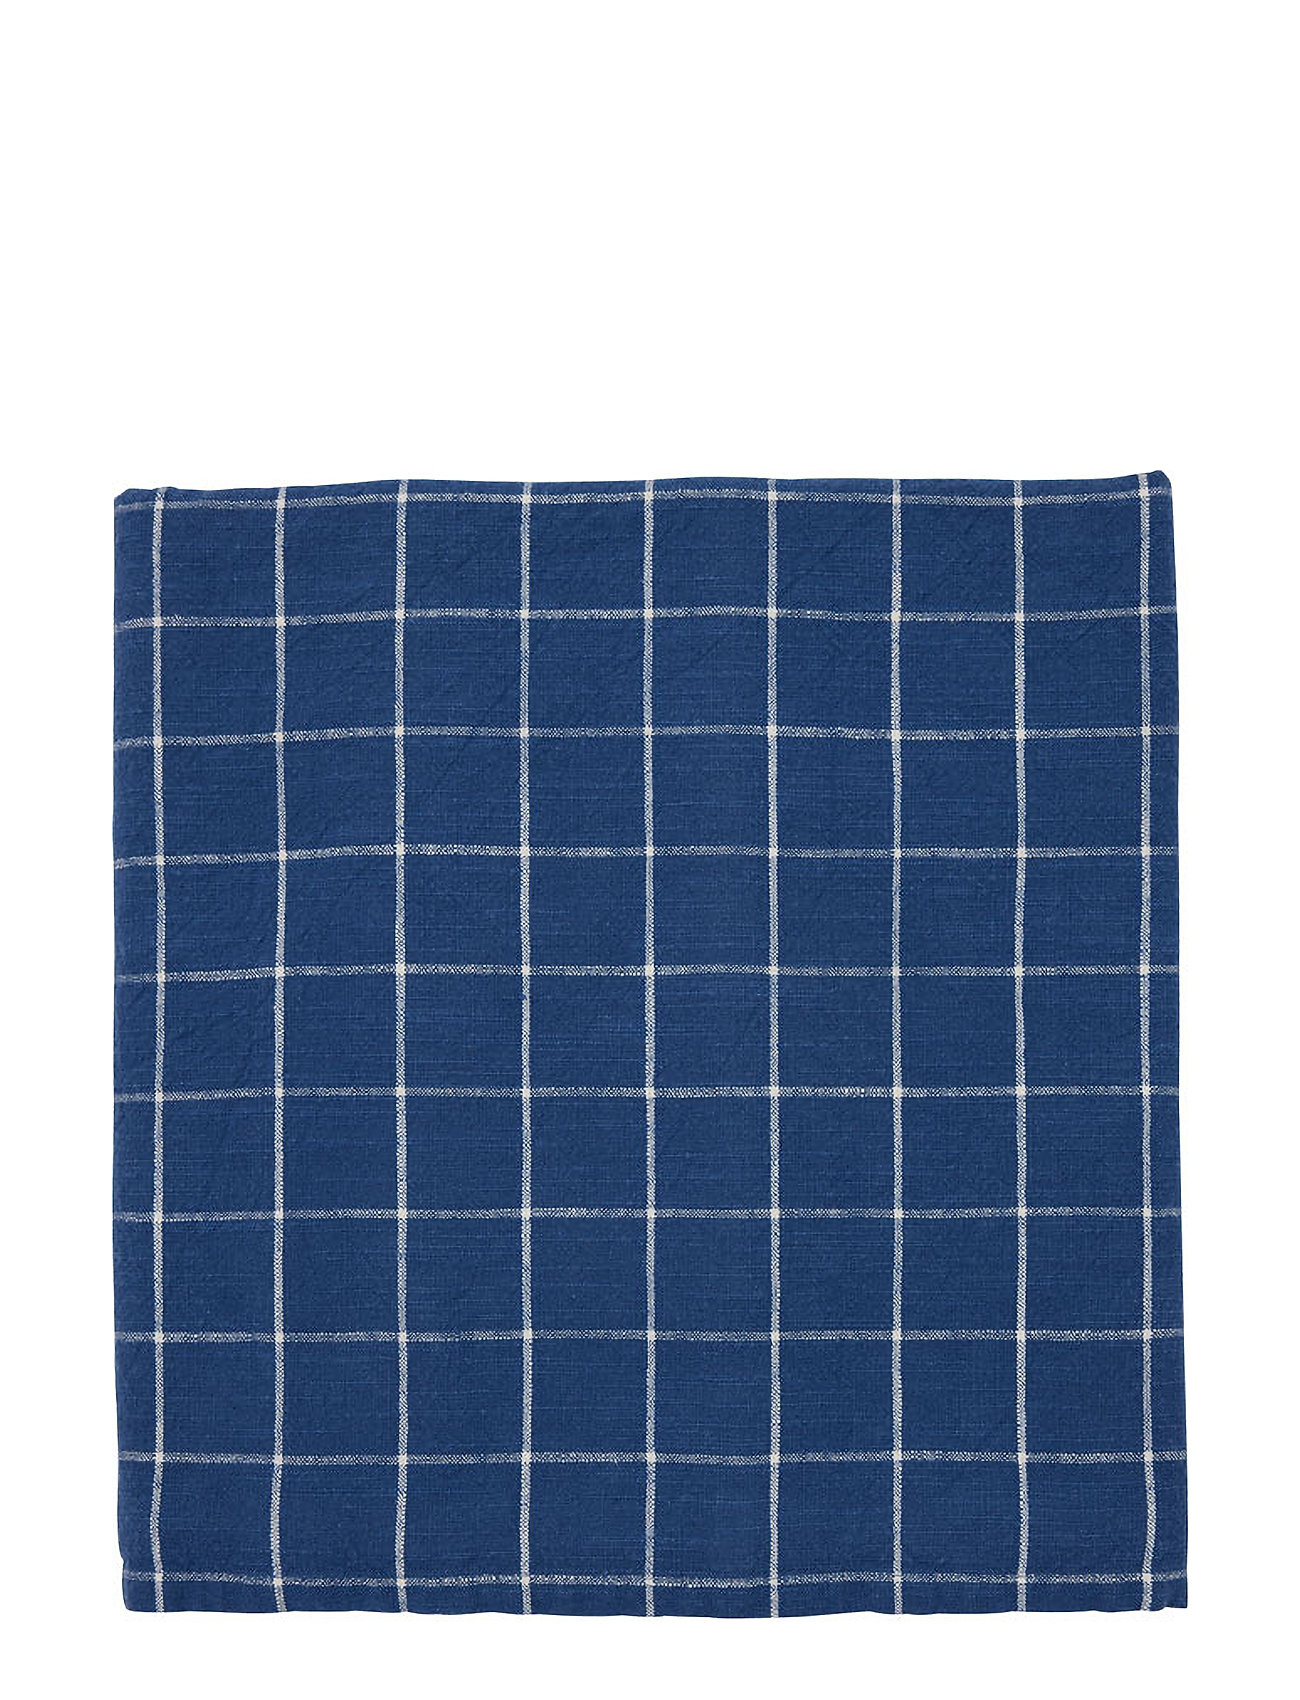 Grid Tablecloth - 200X140 Cm Home Textiles Kitchen Textiles Tablecloths & Table Runners Blue OYOY Living Design